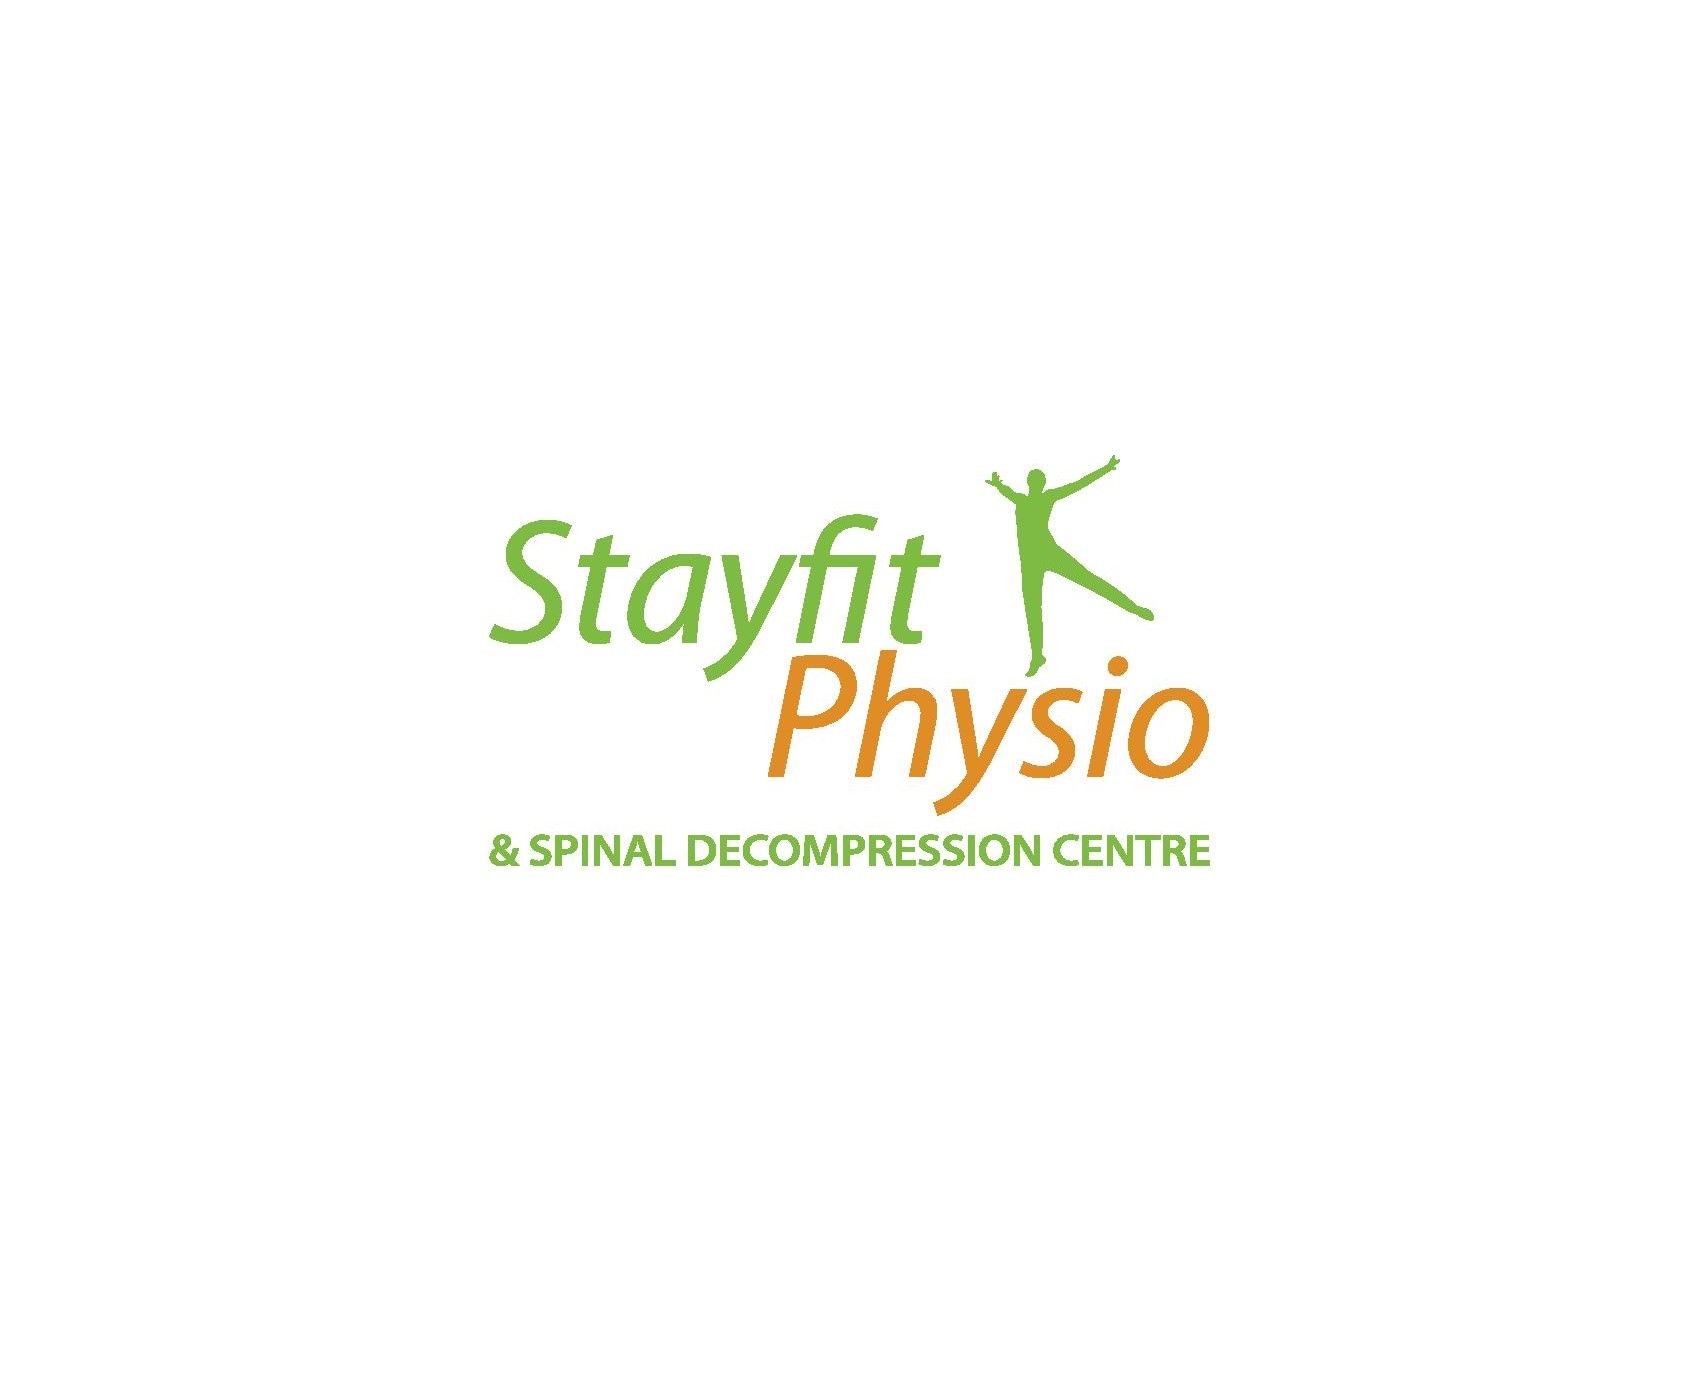 Healthcare and Aesthetic - Stayfit Physio